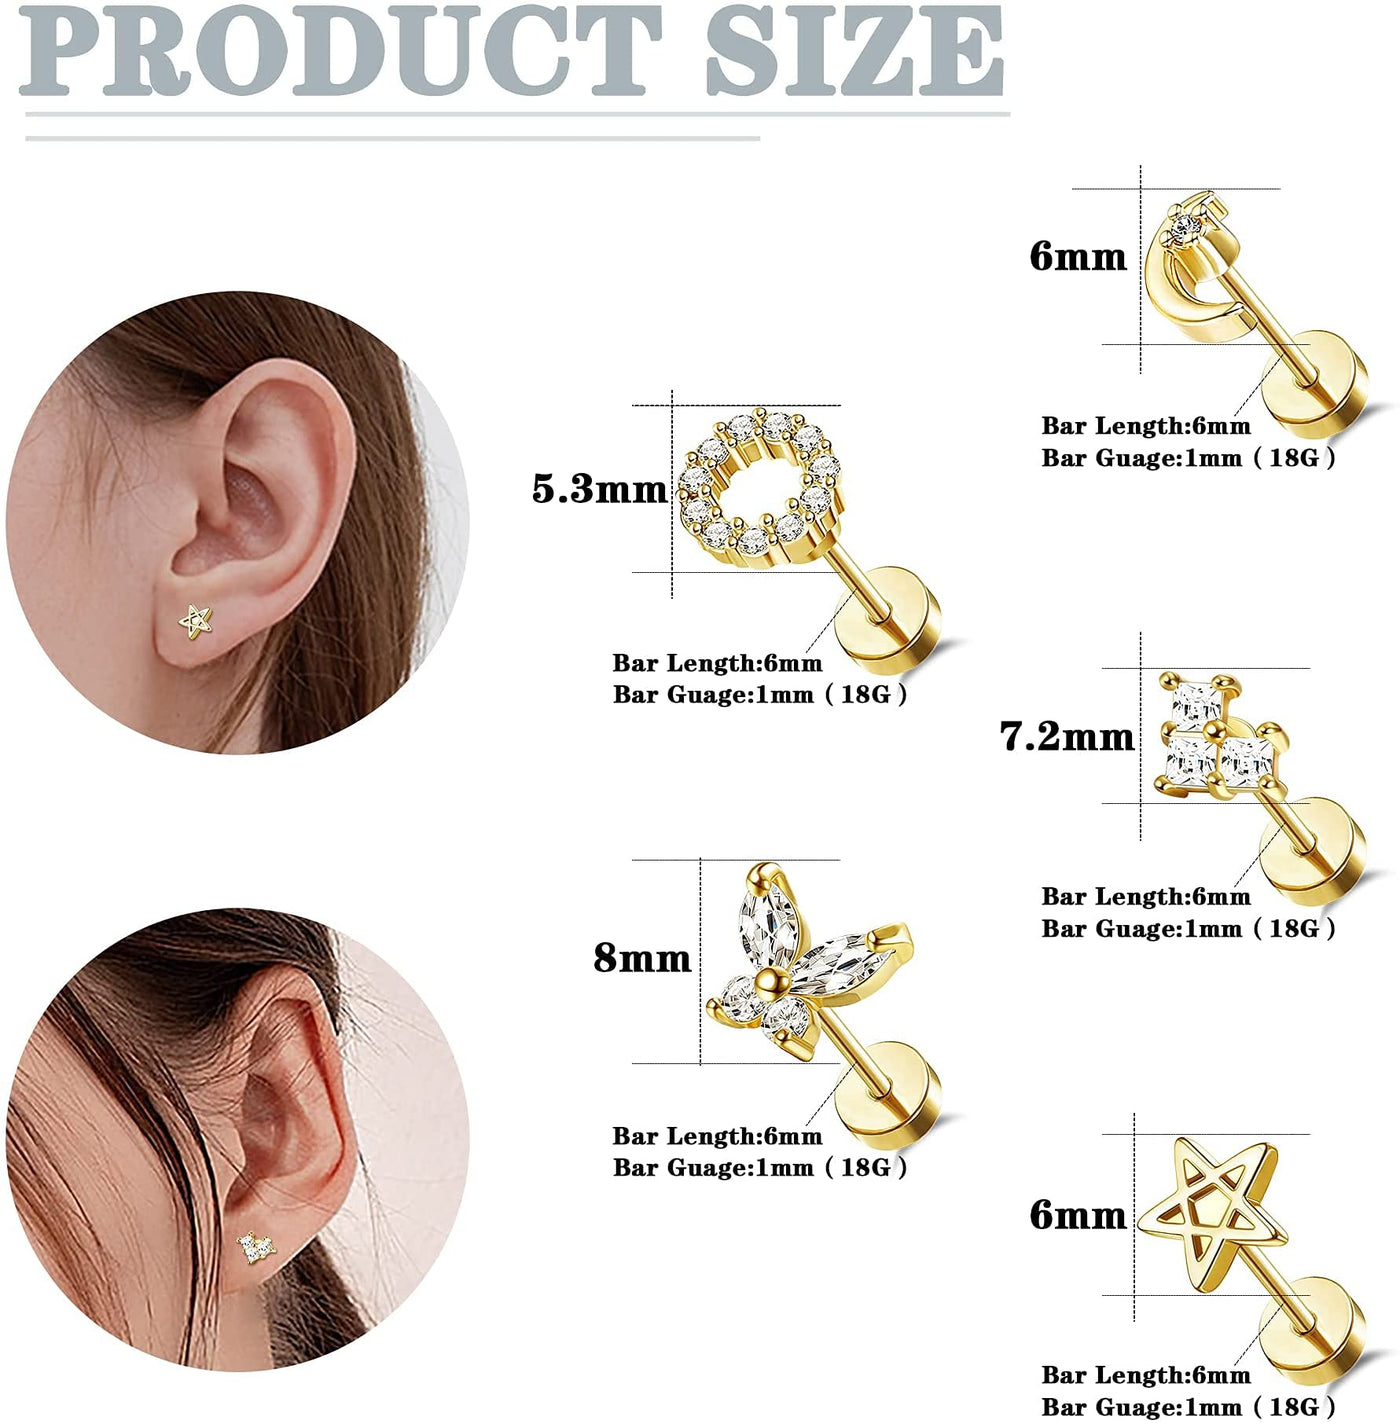 STAINLY 5Pairs Flat Back Earrings for Women Men Hypoallergenic 316L Surgical Steel Stud Earring for Sensitive Ears Cubic Zirconia Opal 20g Cartilage